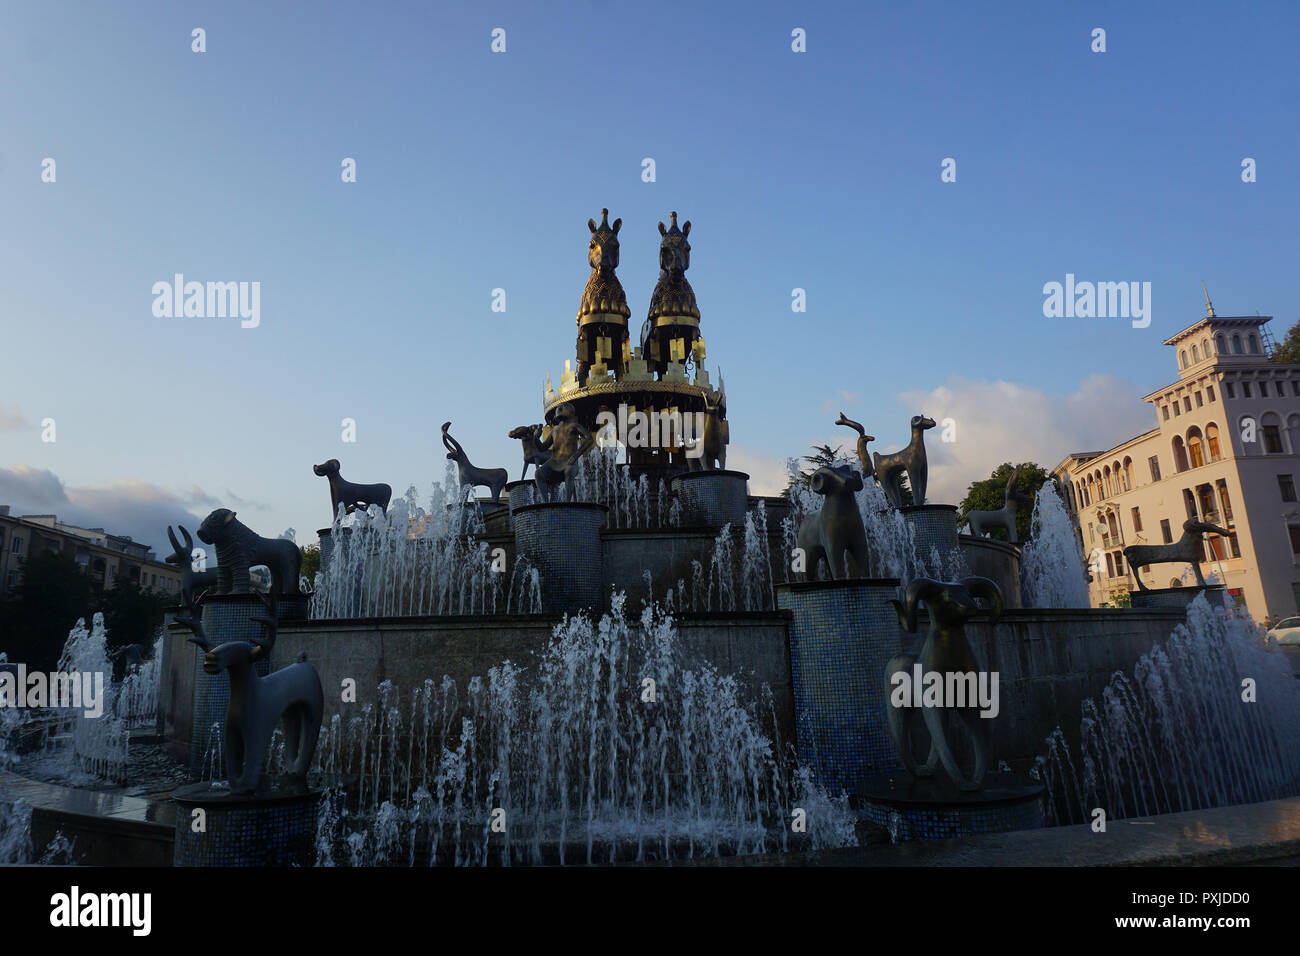 Kutaisi Colchis Fountain with Two Horses and Other Animals under Blue Sky Stock Photo